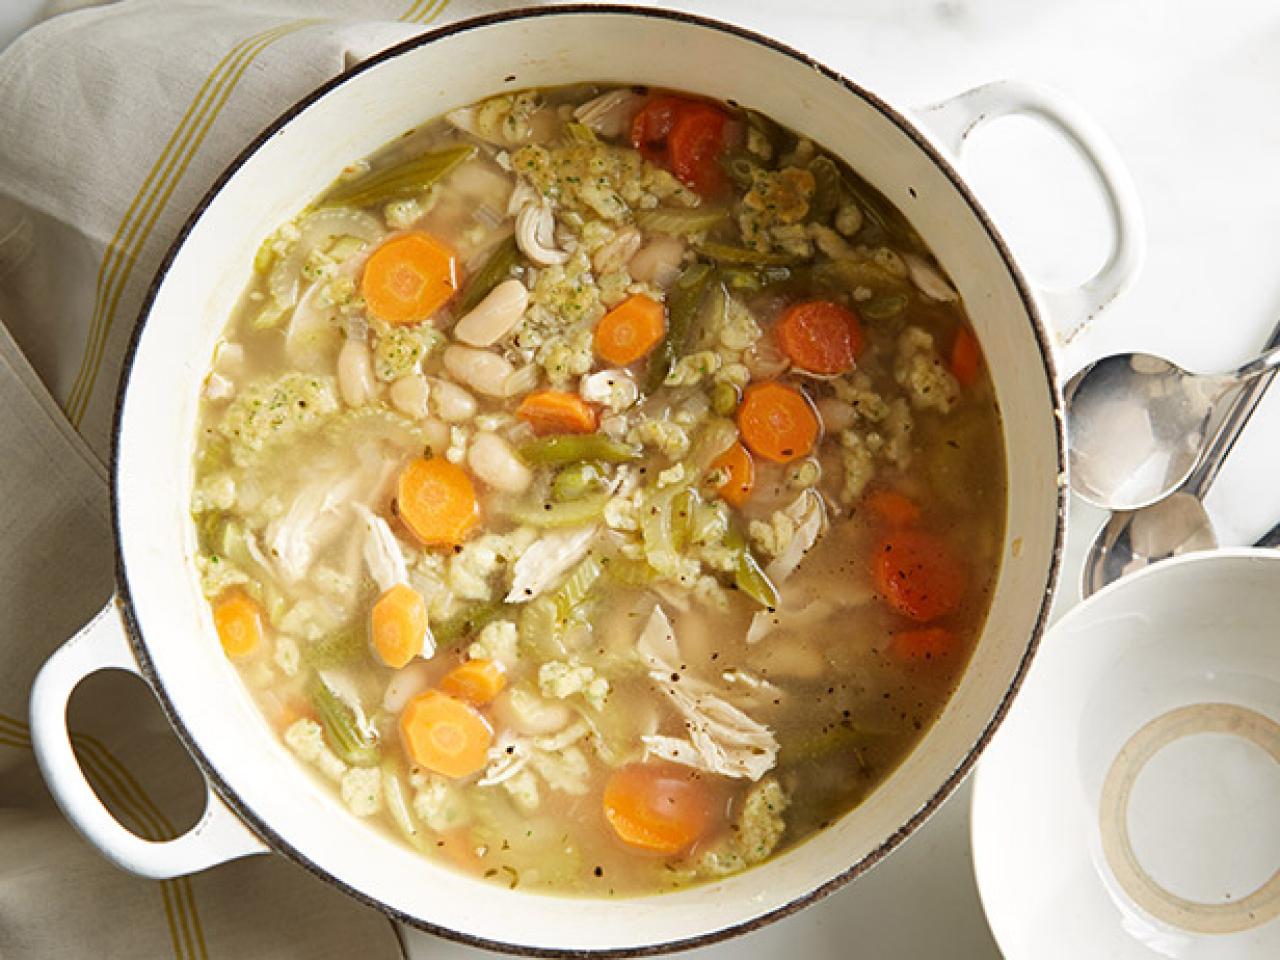 Mom's Chicken Soup with Quinoa - 2 Sisters Recipes by Anna and Liz